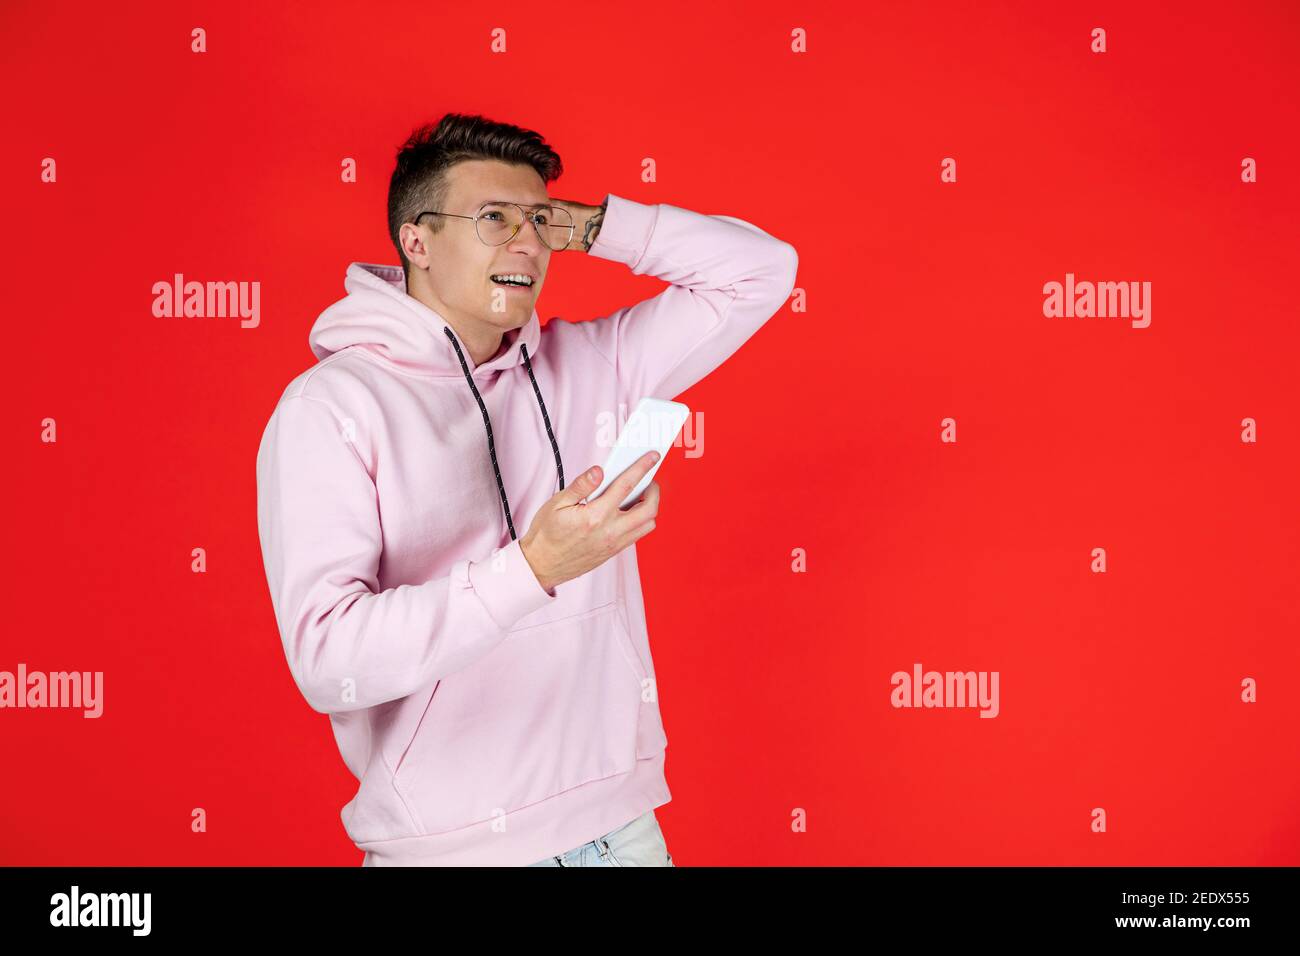 Doubtfully holding phone. Caucasian man's portrait isolated on red background with copyspace. Handsome male model in street style. Concept of human emotions, facial expression, sales, ad, fashion. Stock Photo